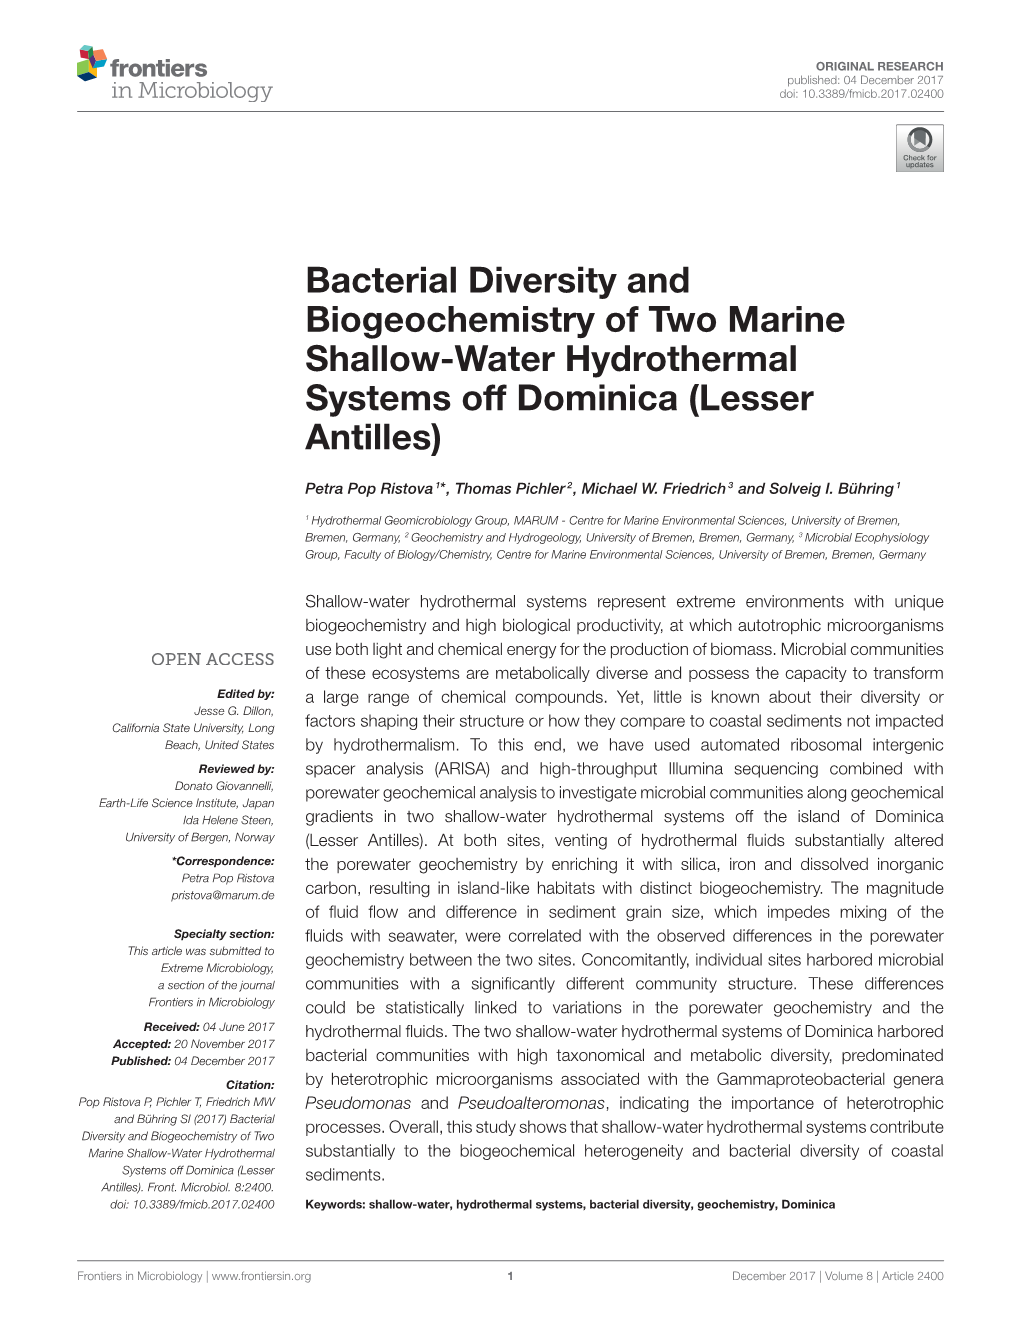 Bacterial Diversity and Biogeochemistry of Two Marine Shallow-Water Hydrothermal Systems Off Dominica (Lesser Antilles)